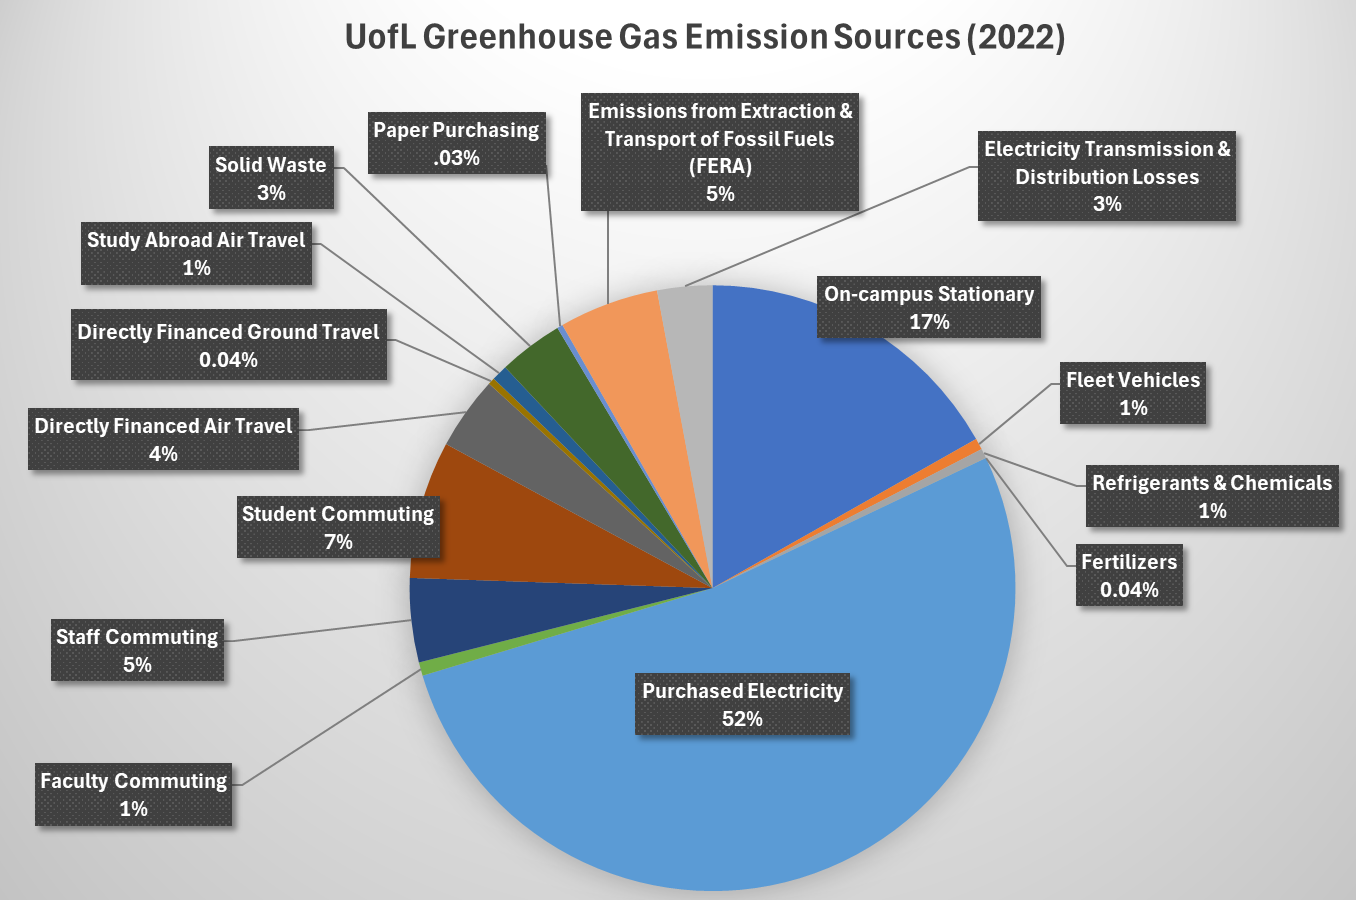 Sources of UofL GHG Emissions 2022